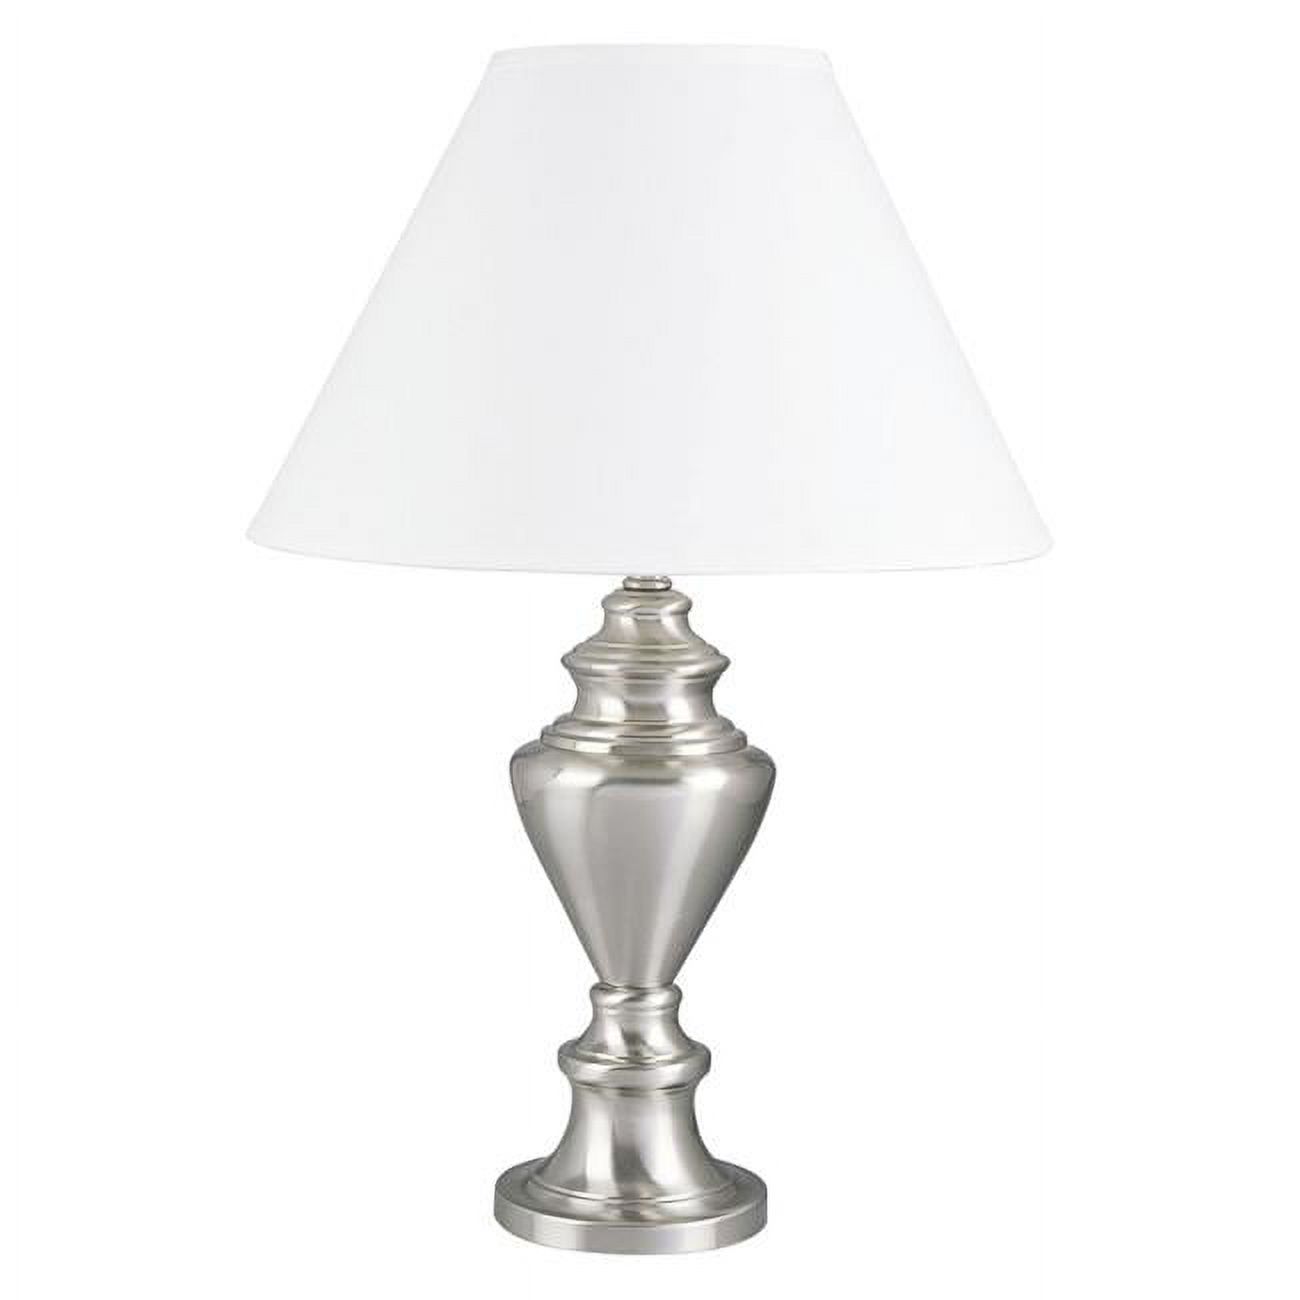 HomeRoots 468566 28 in. Metal Urn Table Lamp with White Classic Empire Shade, Nickel - image 1 of 6